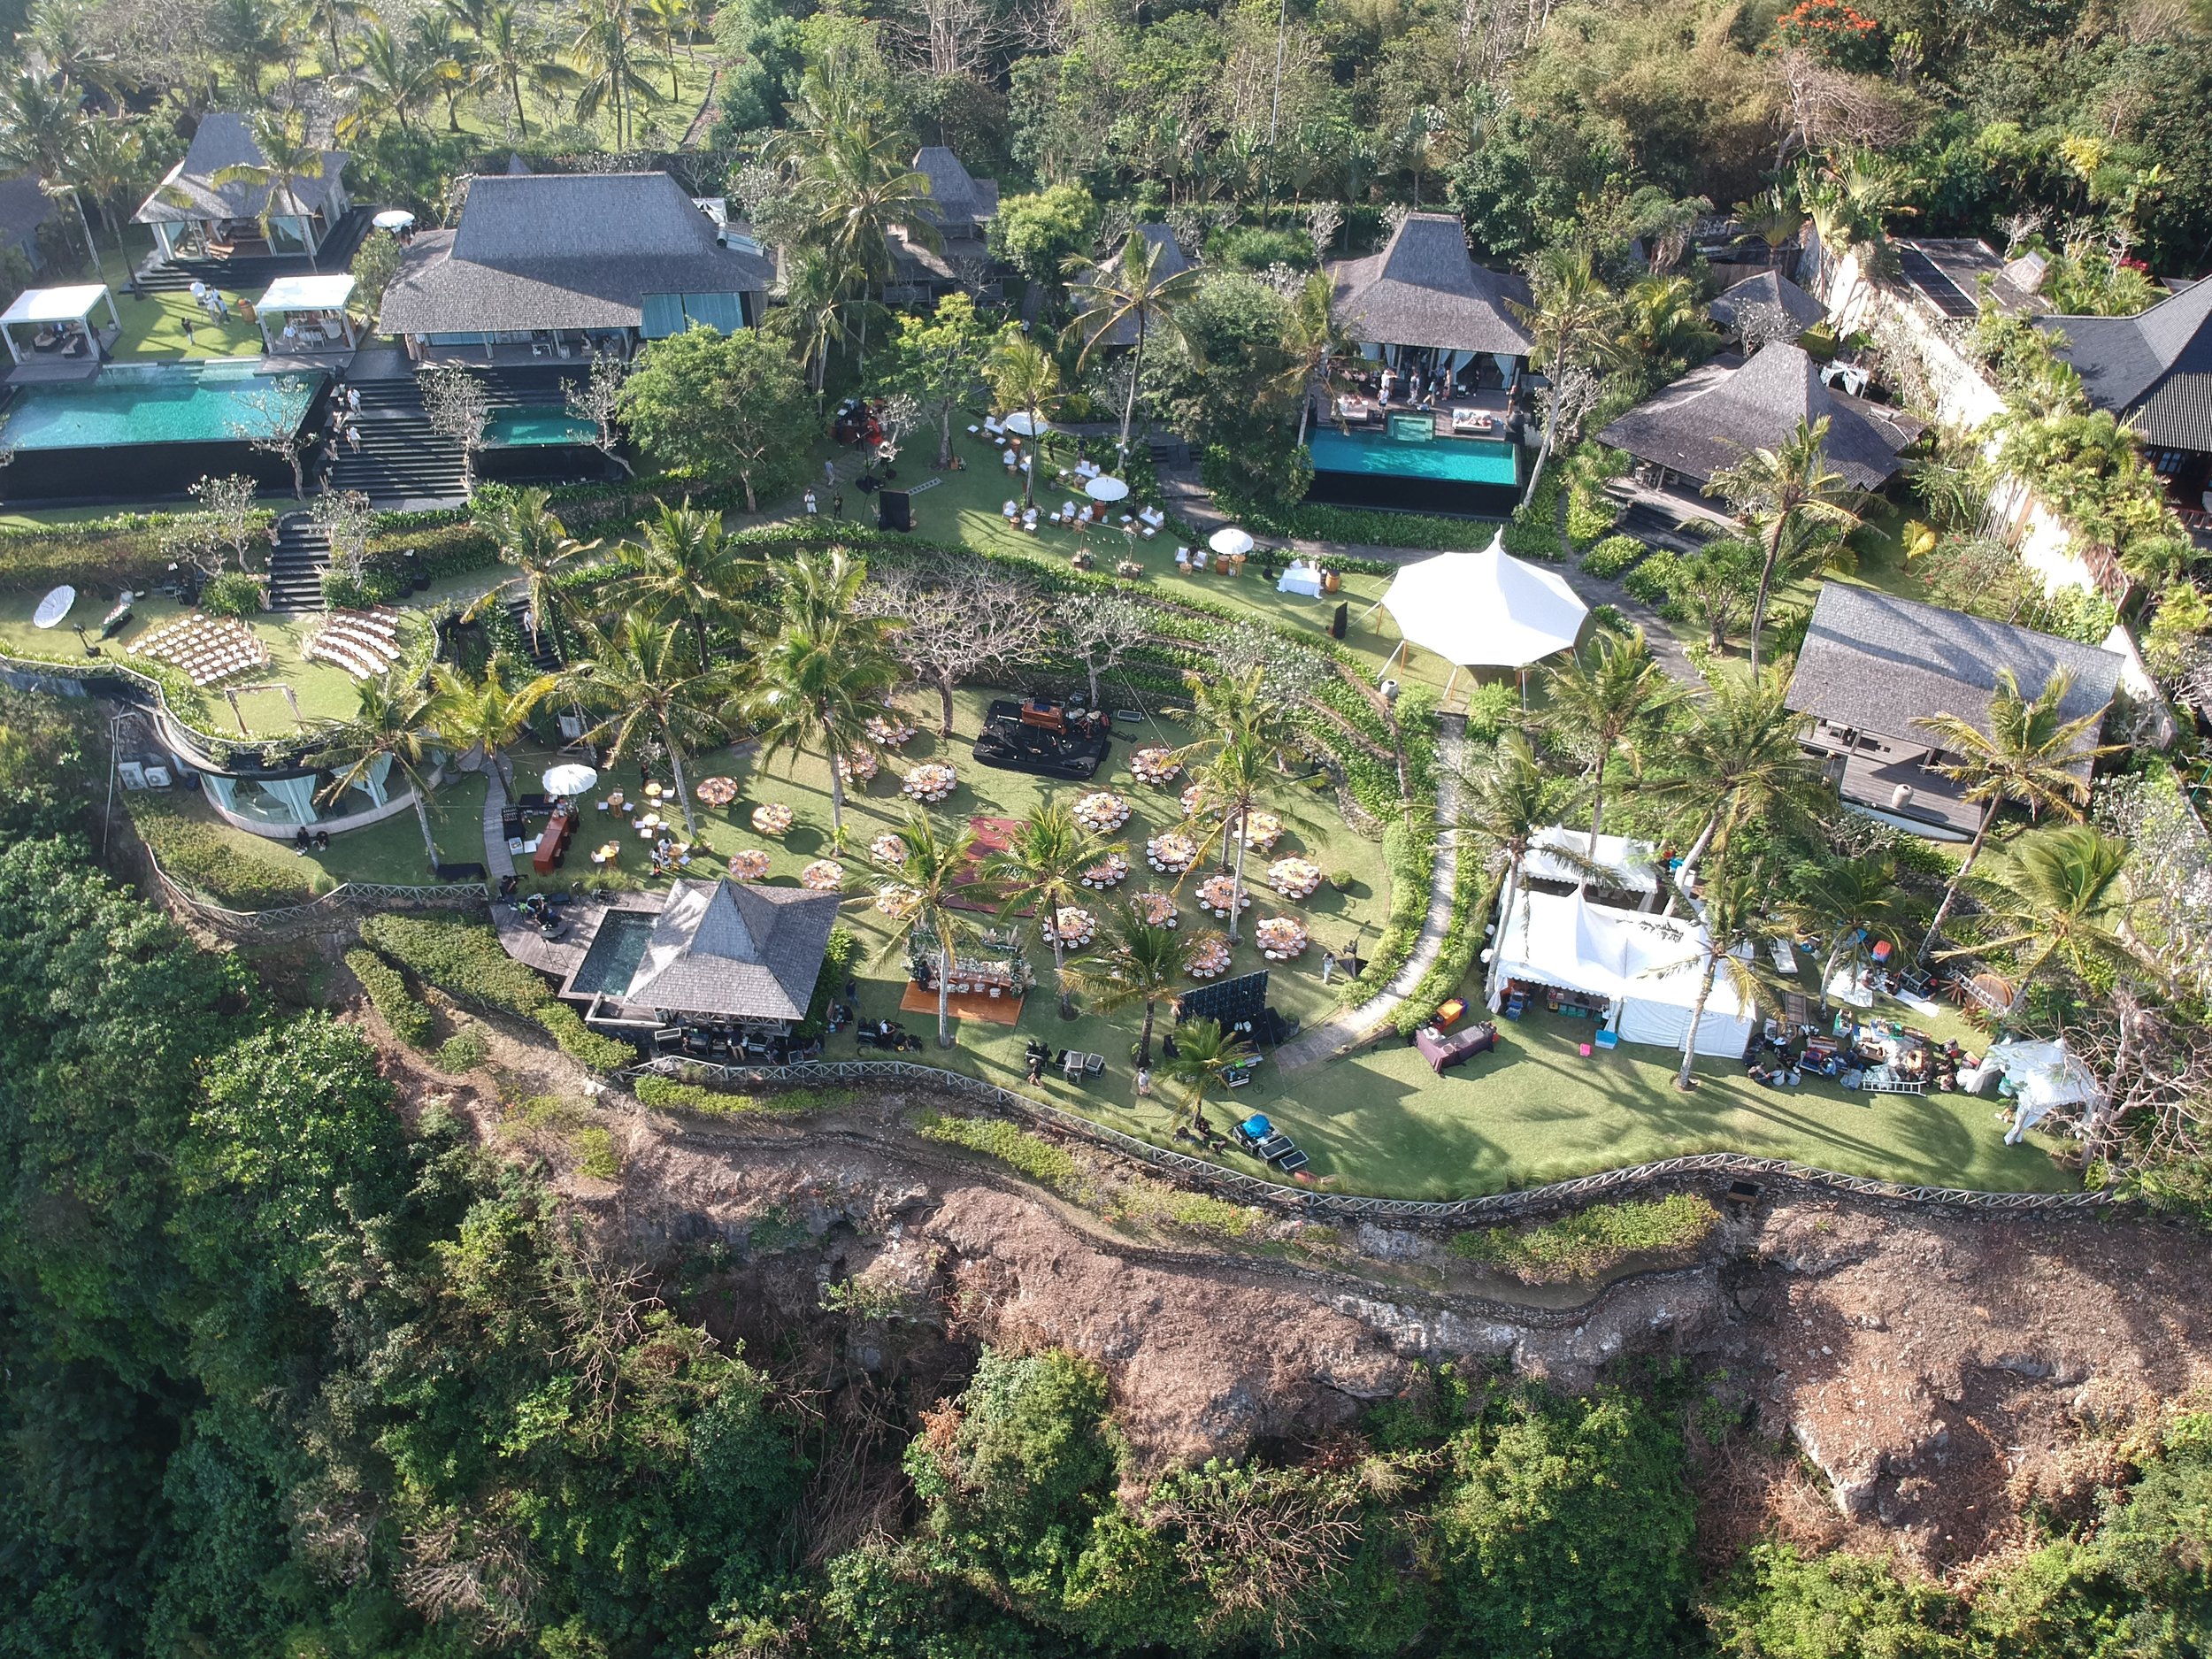 Overview of Khayangan Estate, Image from A Tent in Bali